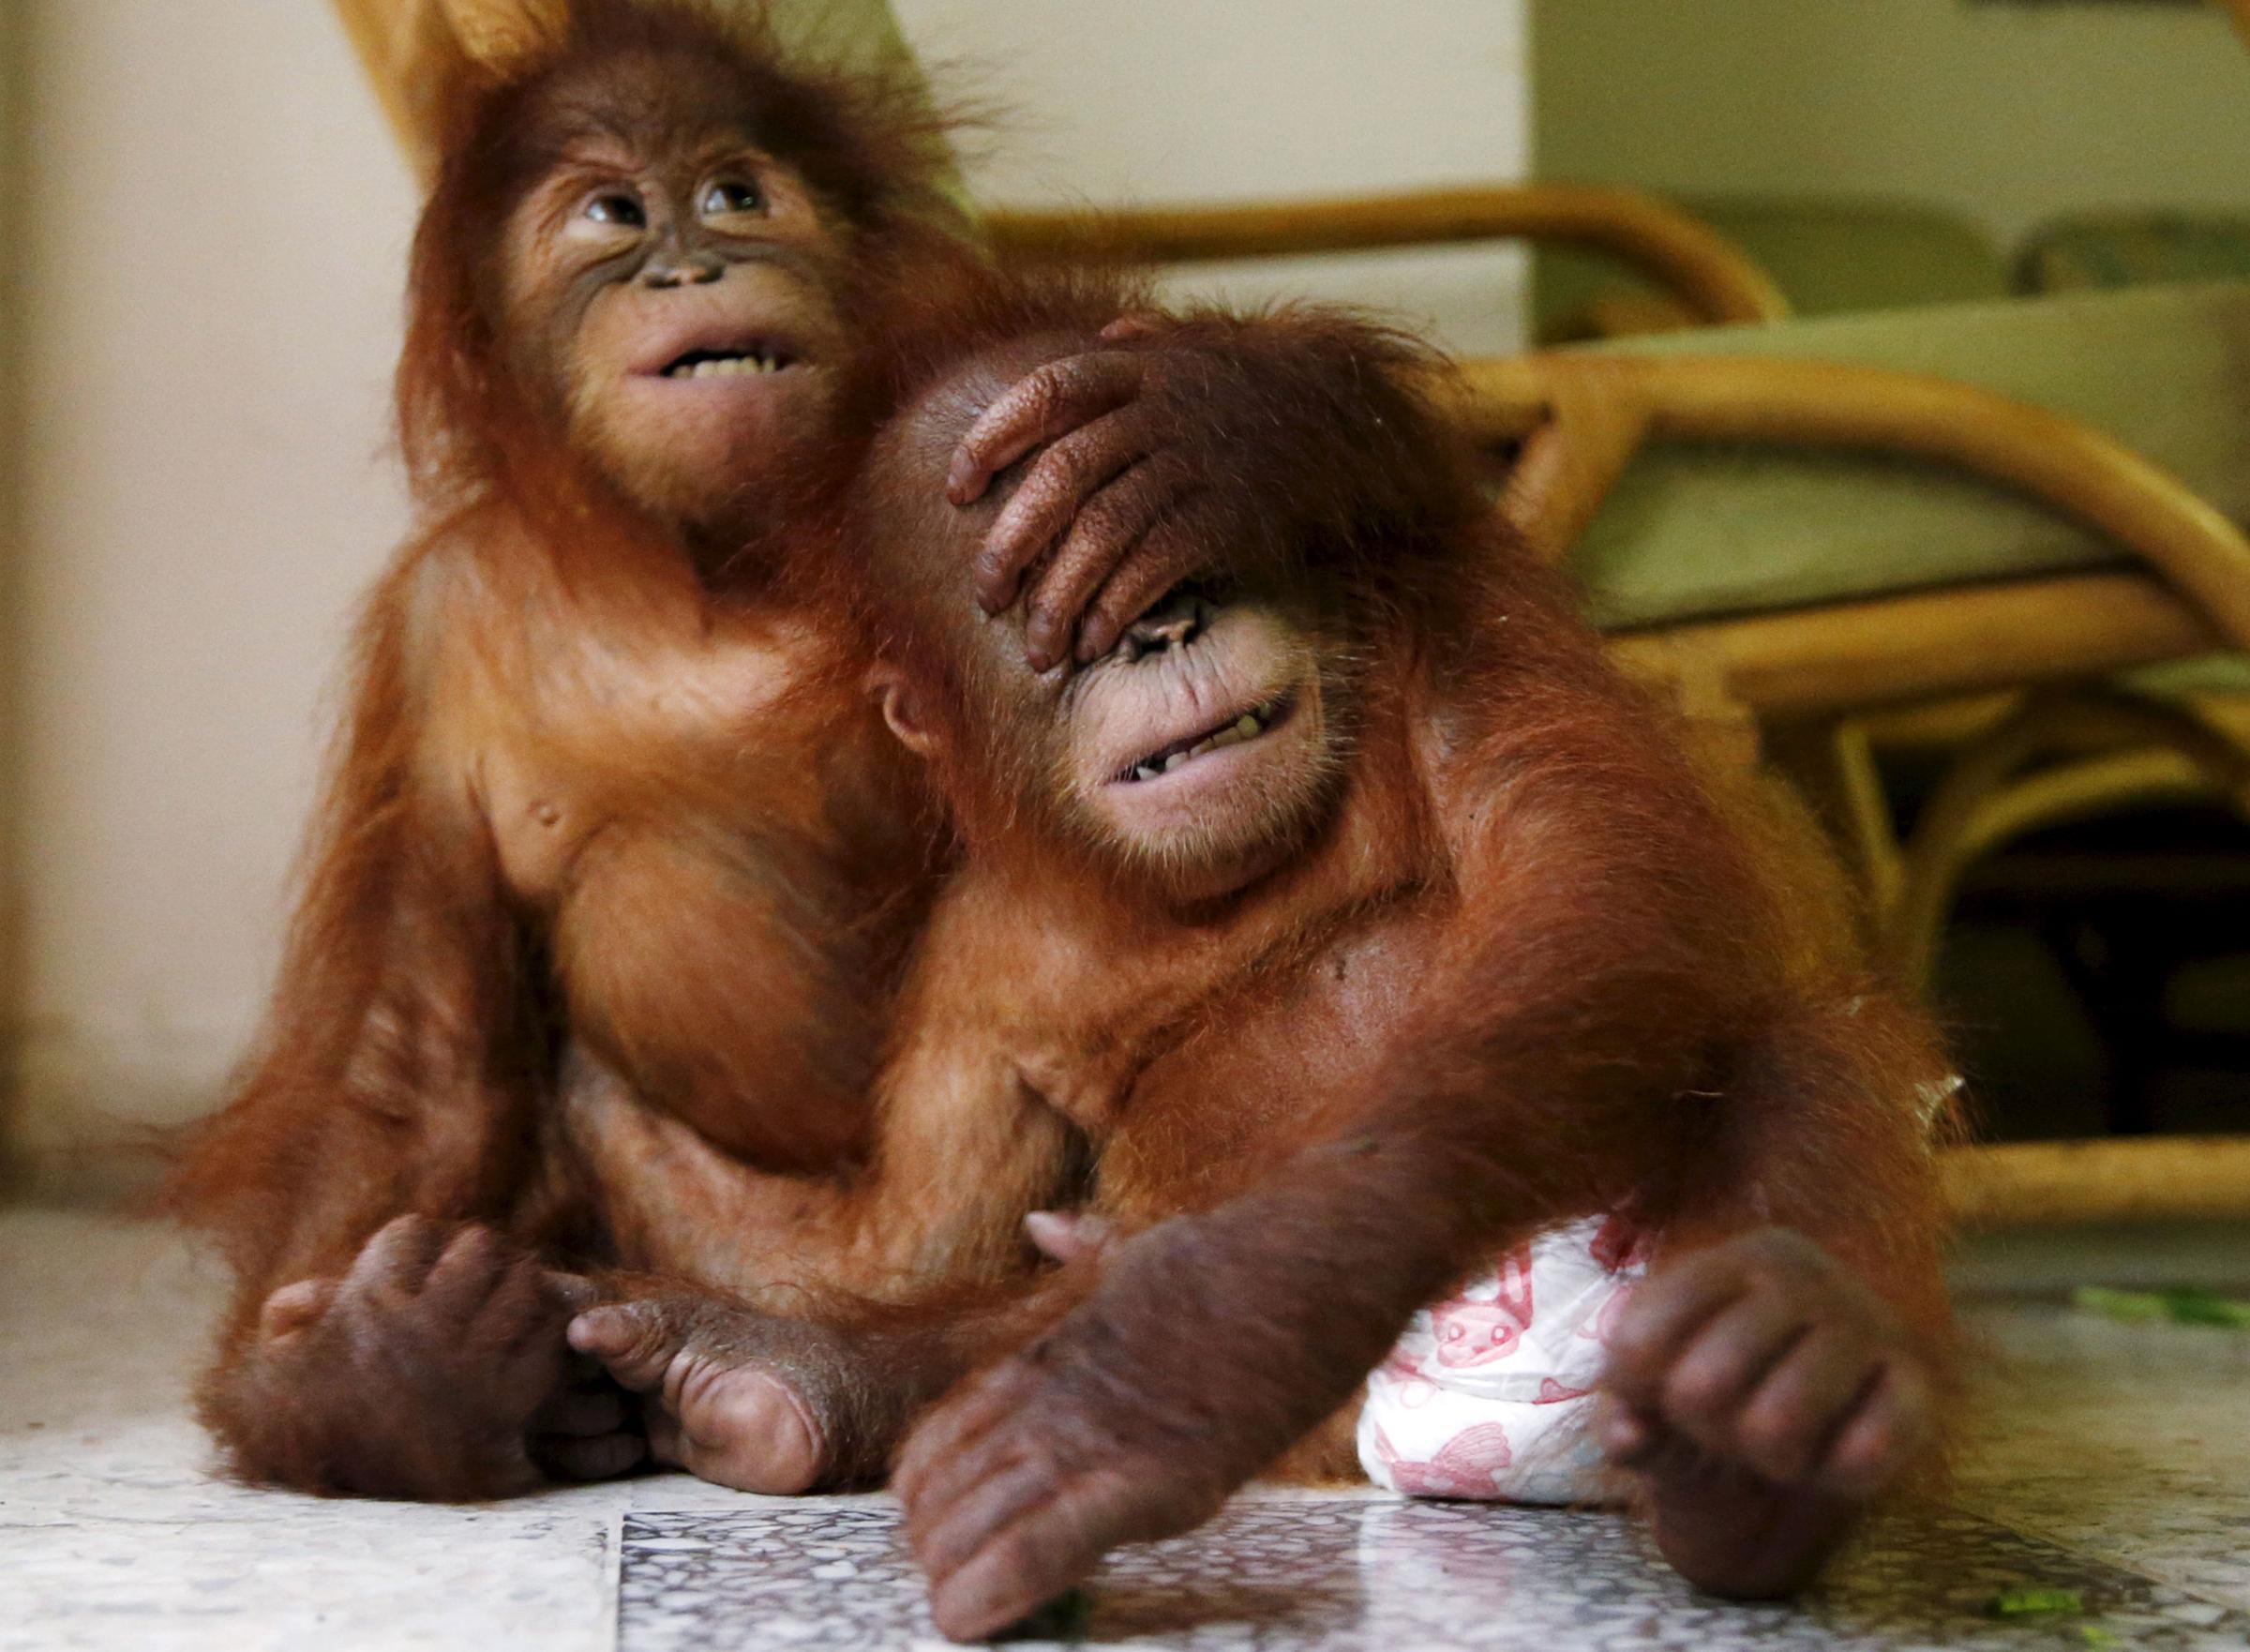 Two baby orangutans play with each other at the wildlife department in Kuala Lumpur